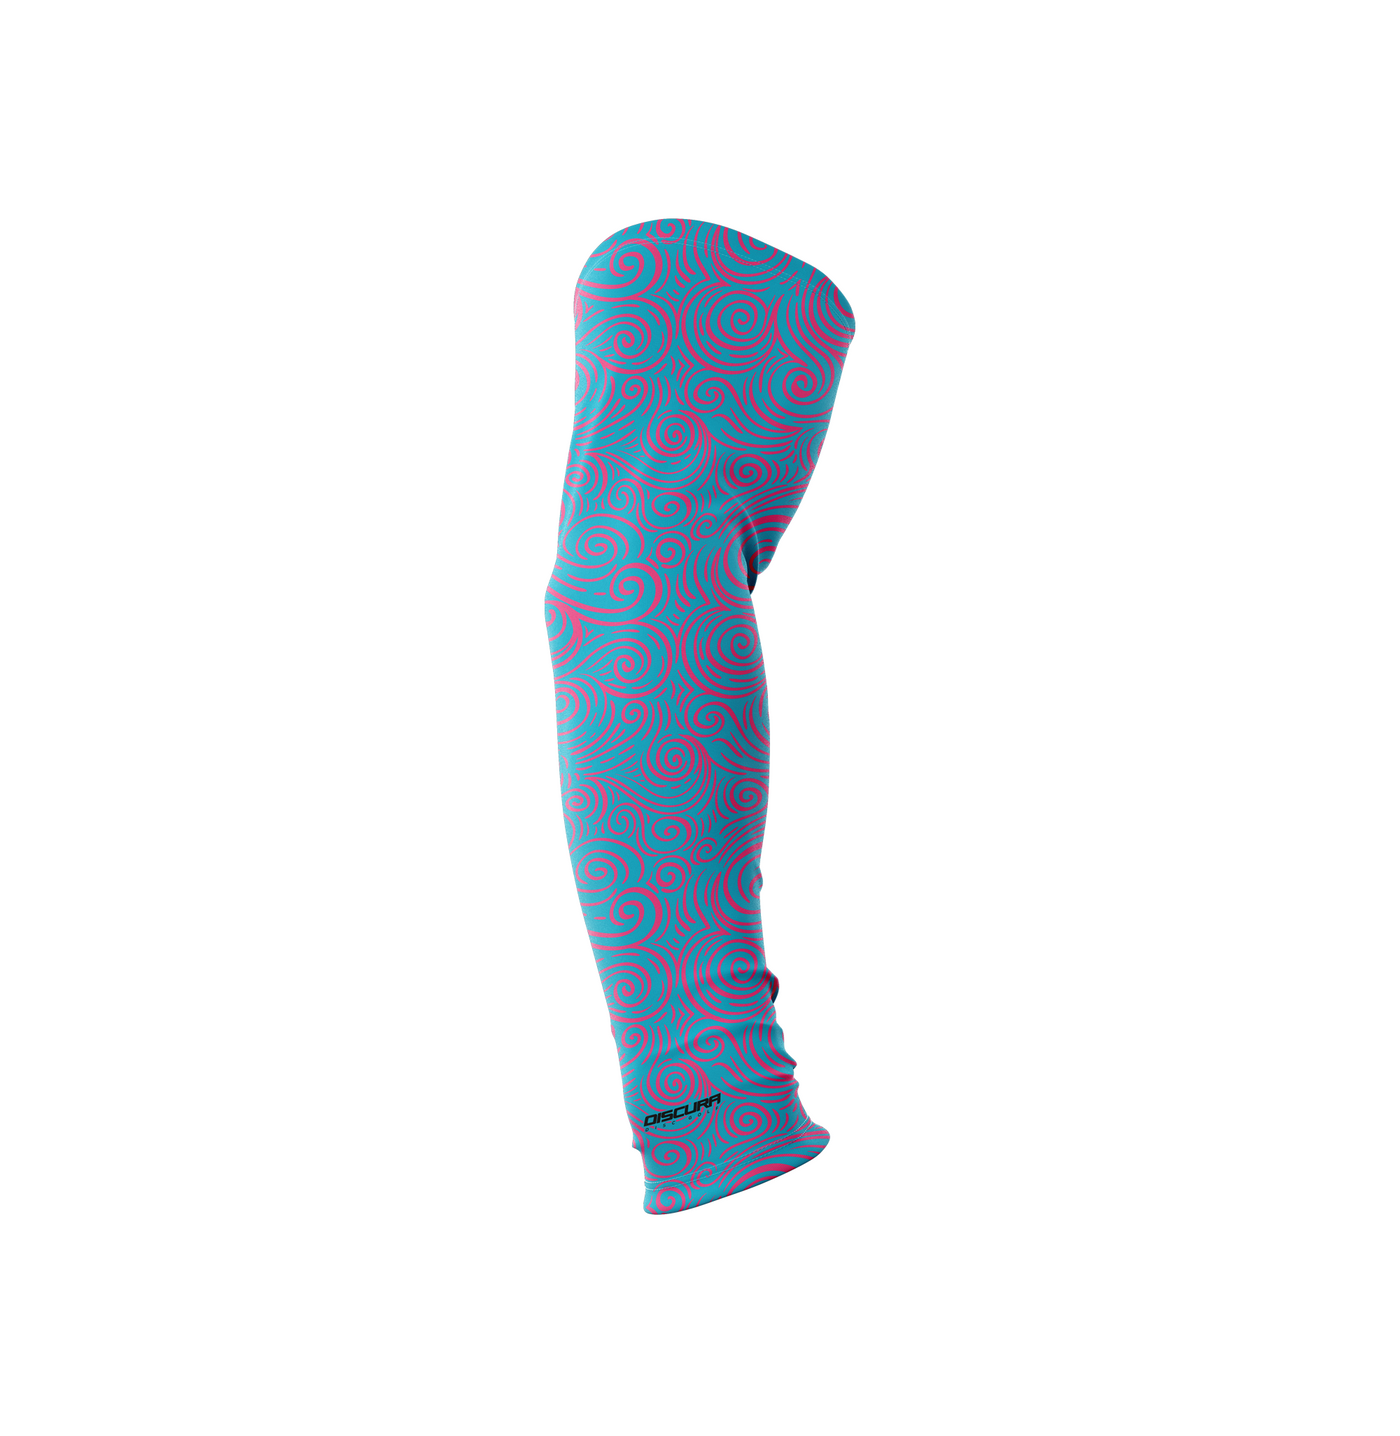 Discura Squall UPF50+ Arm Sleeve